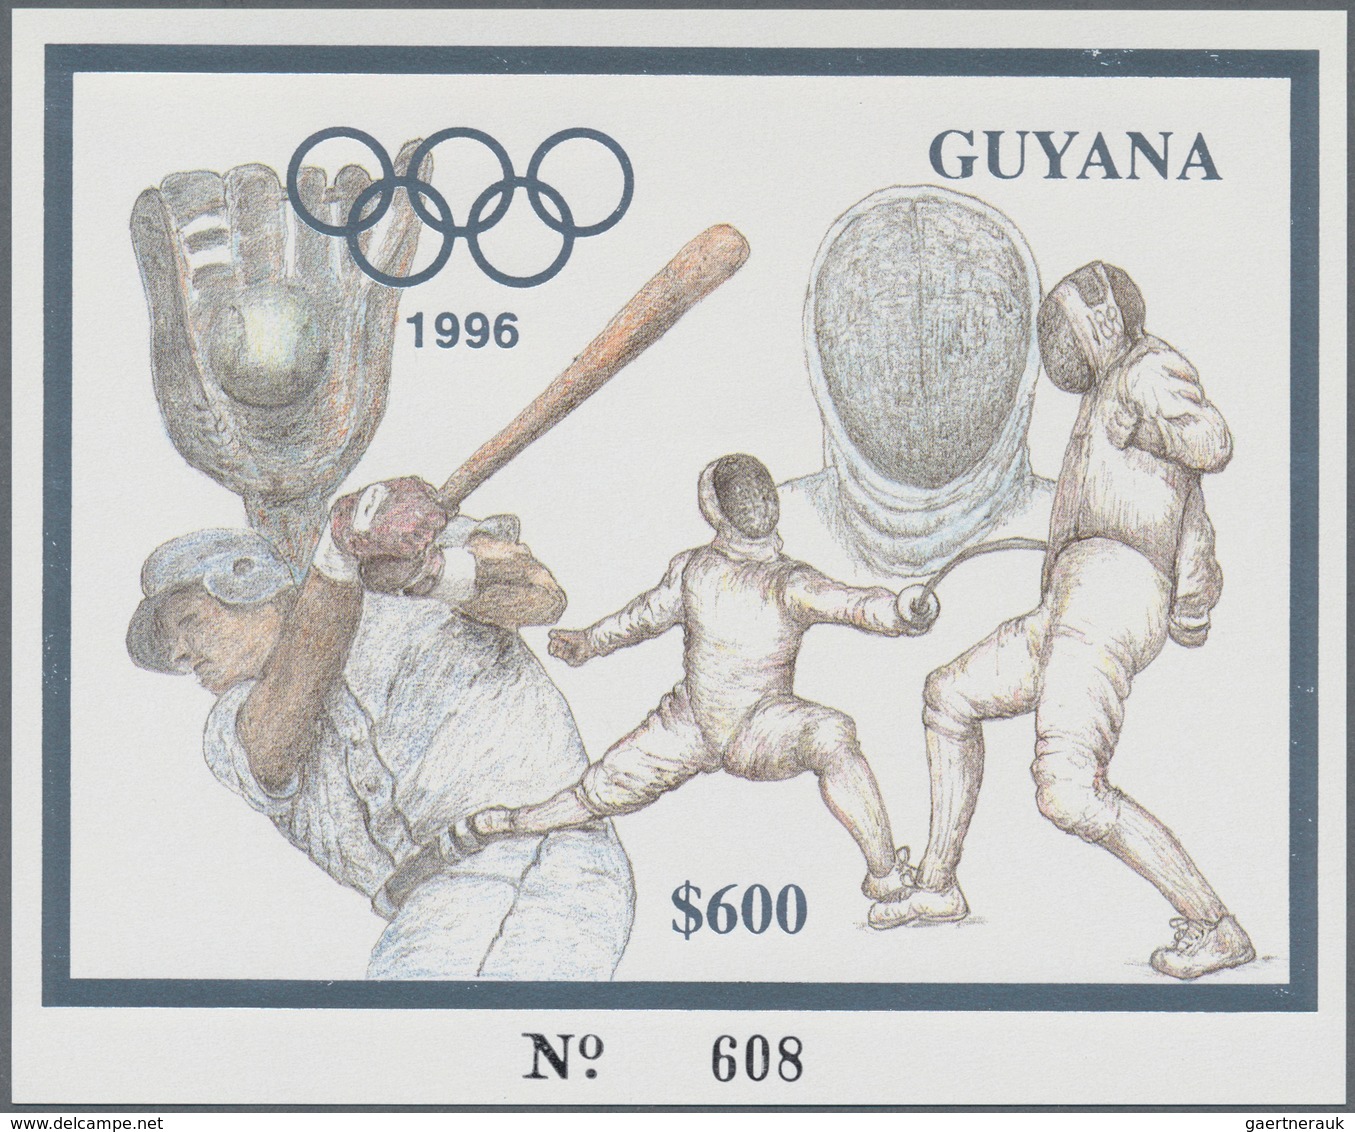 Thematik: Olympische Spiele / olympic games: 1993, Guyana. Complete set of 5 times 2 GOLD and SILVER